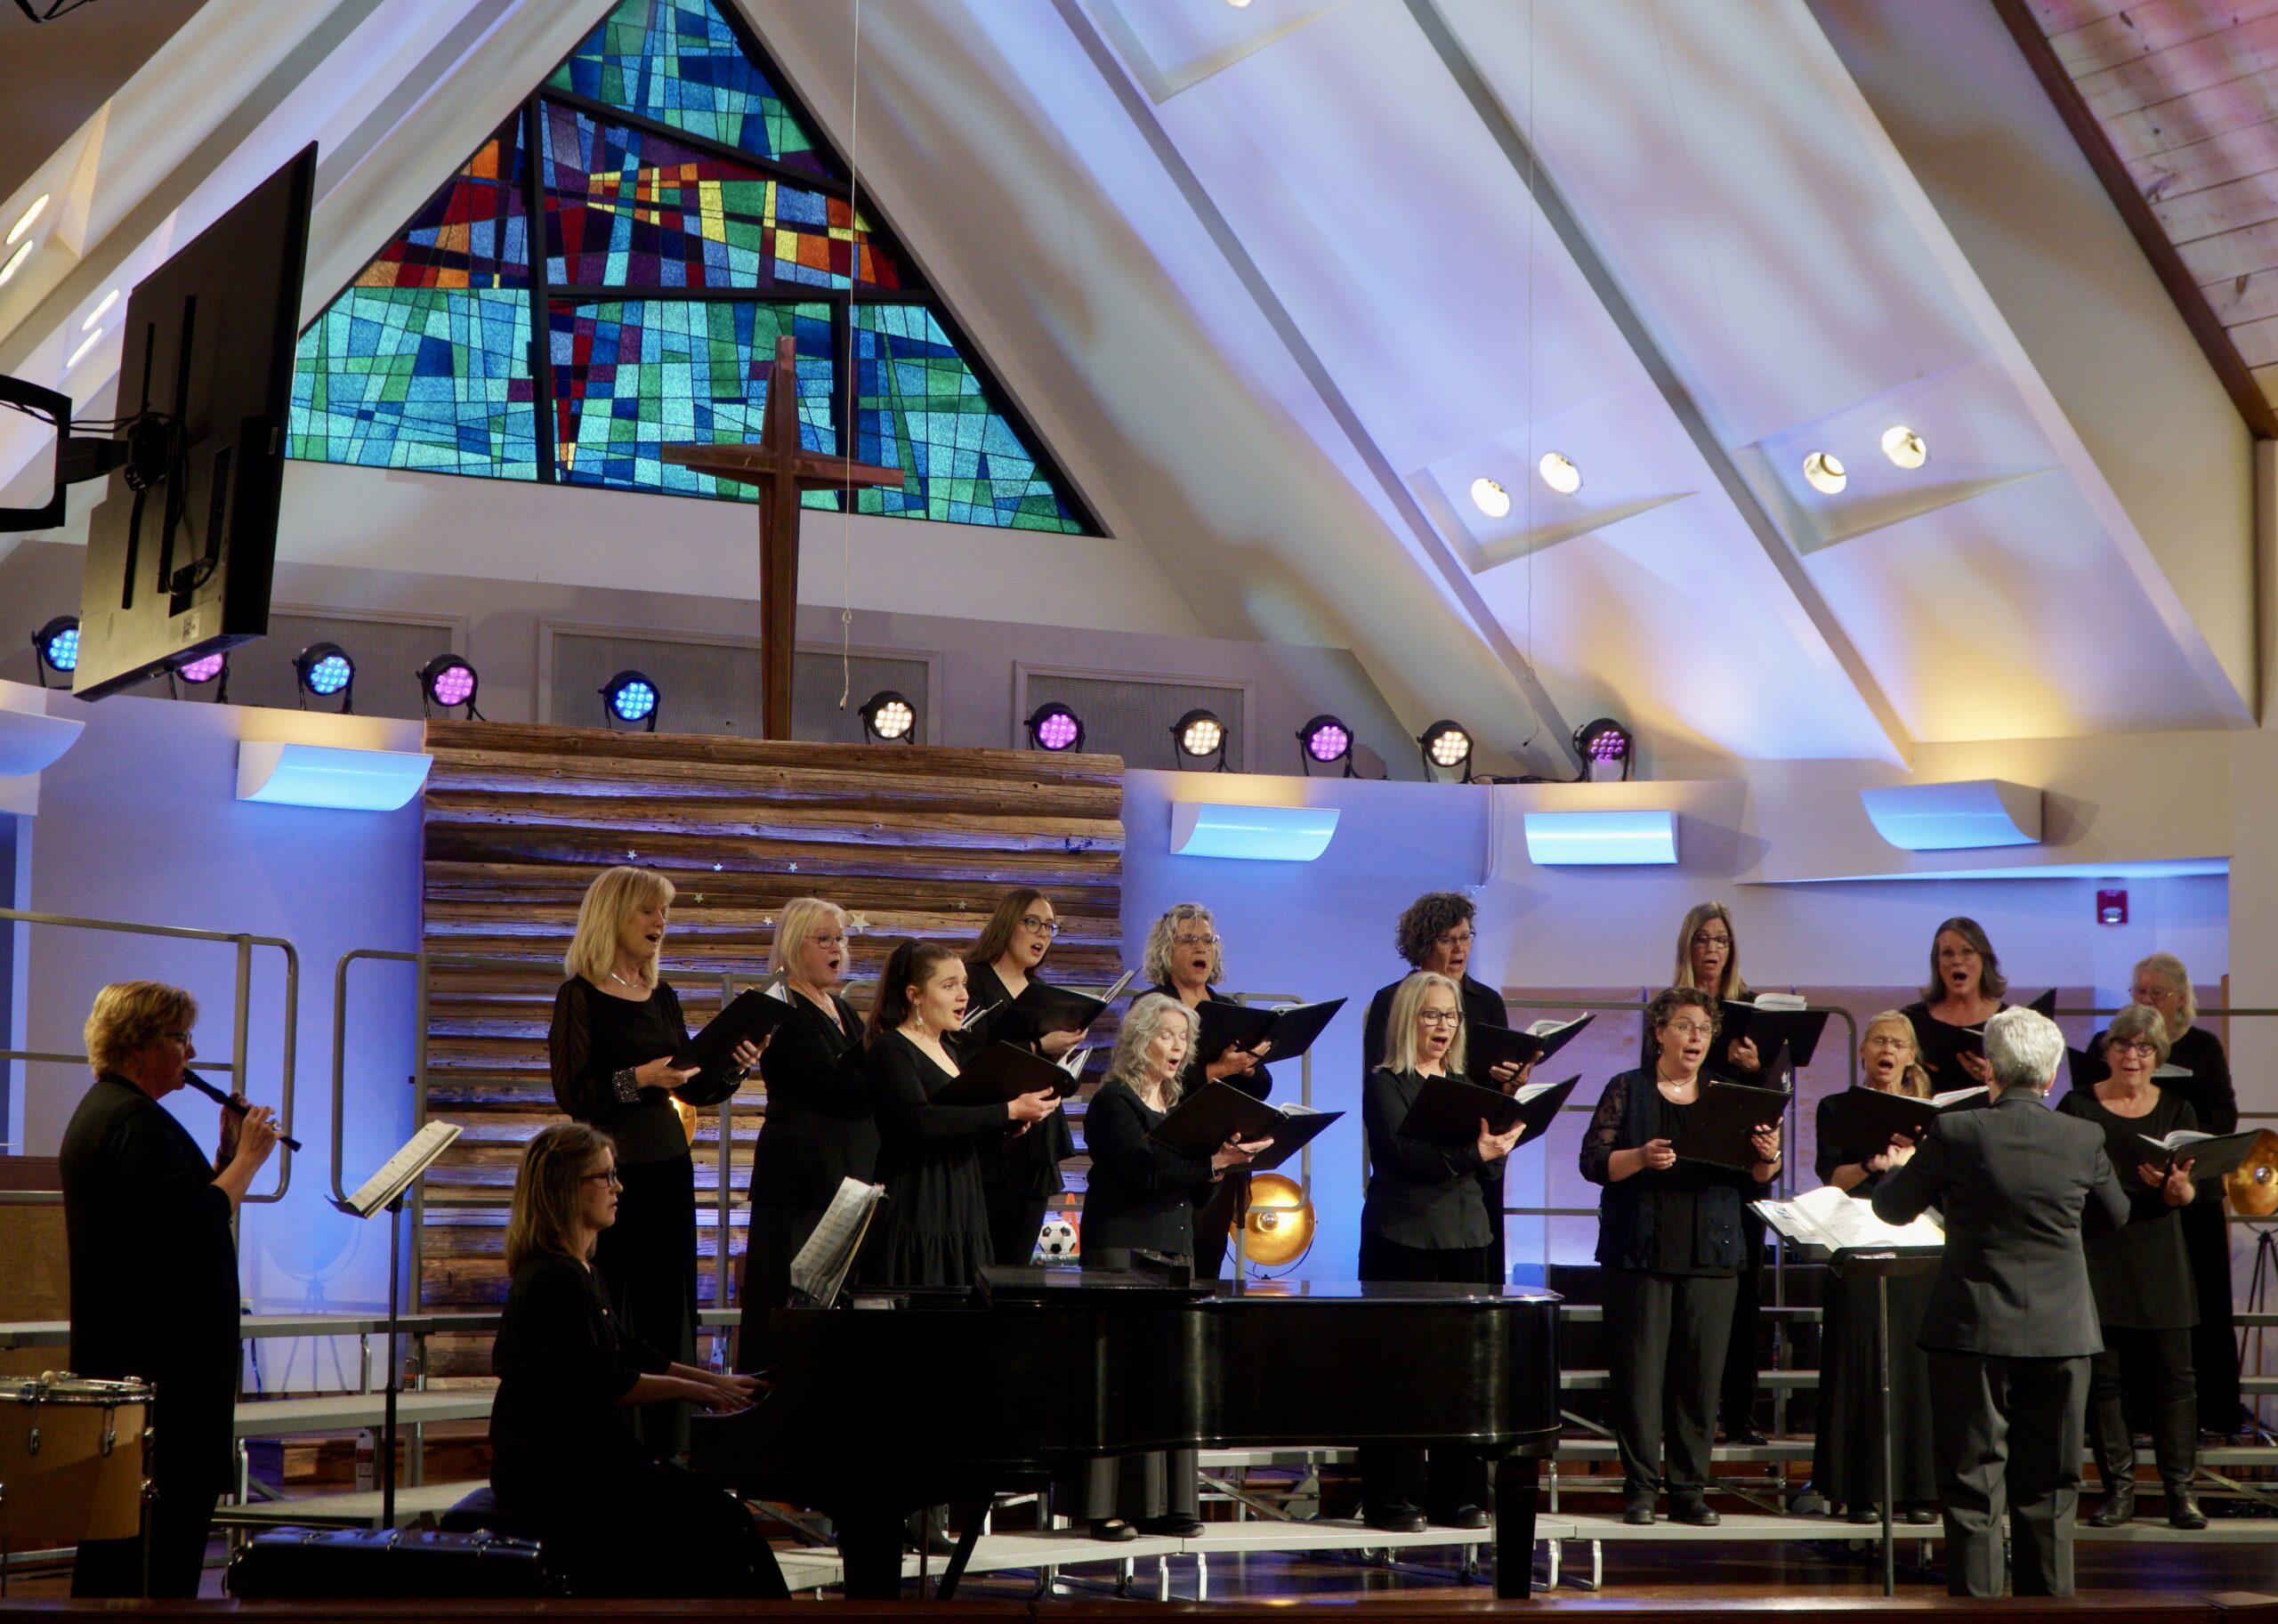 Small group of women wearing black singing while standing on risers. Background has A-frame ceiling with abstract stained glass window which creates blue and lavendar shadows on  the walls. 